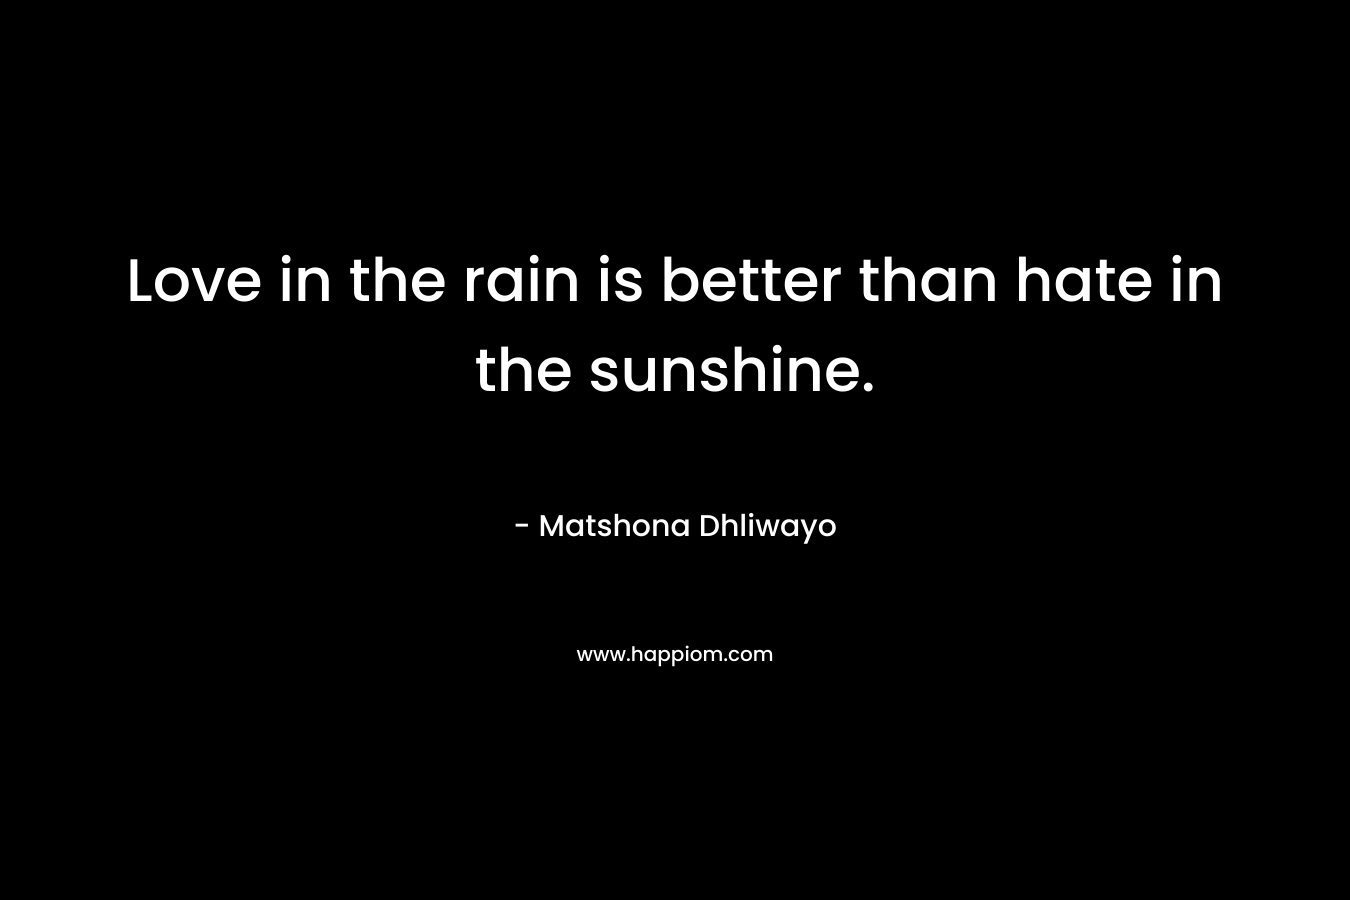 Love in the rain is better than hate in the sunshine.